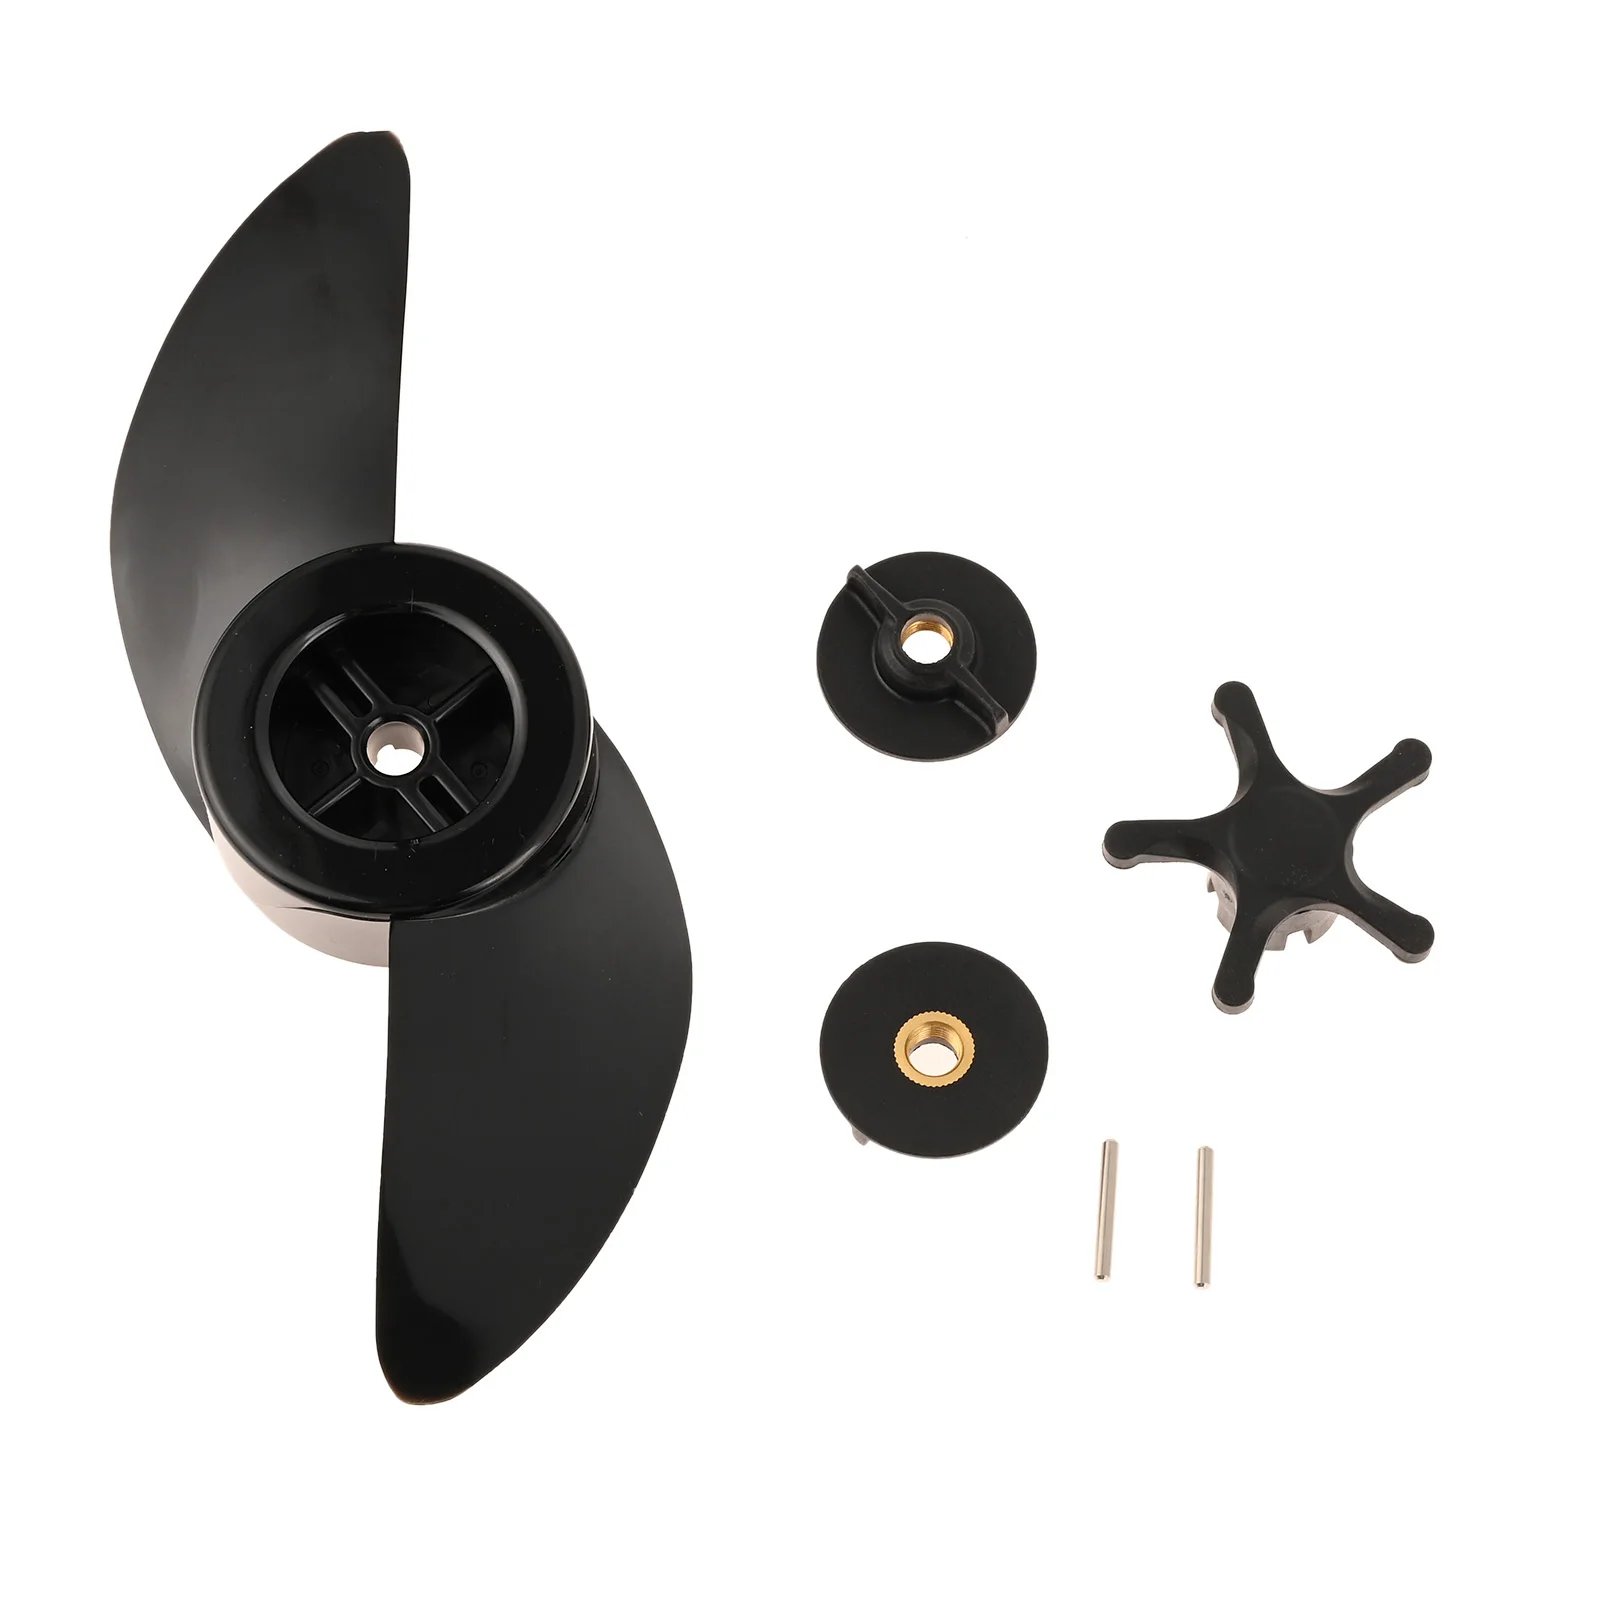 1 Set Boat Two-Blade Propeller Electronic Motor Plastic HAIBO T34 Boat System Propeller For 28lb 30lb 34lb Motors Boat Kayak 1pc 30 teeth car electric side view mirror motor gear for hyundais for santa fe plastic folding motors gears autos replacements